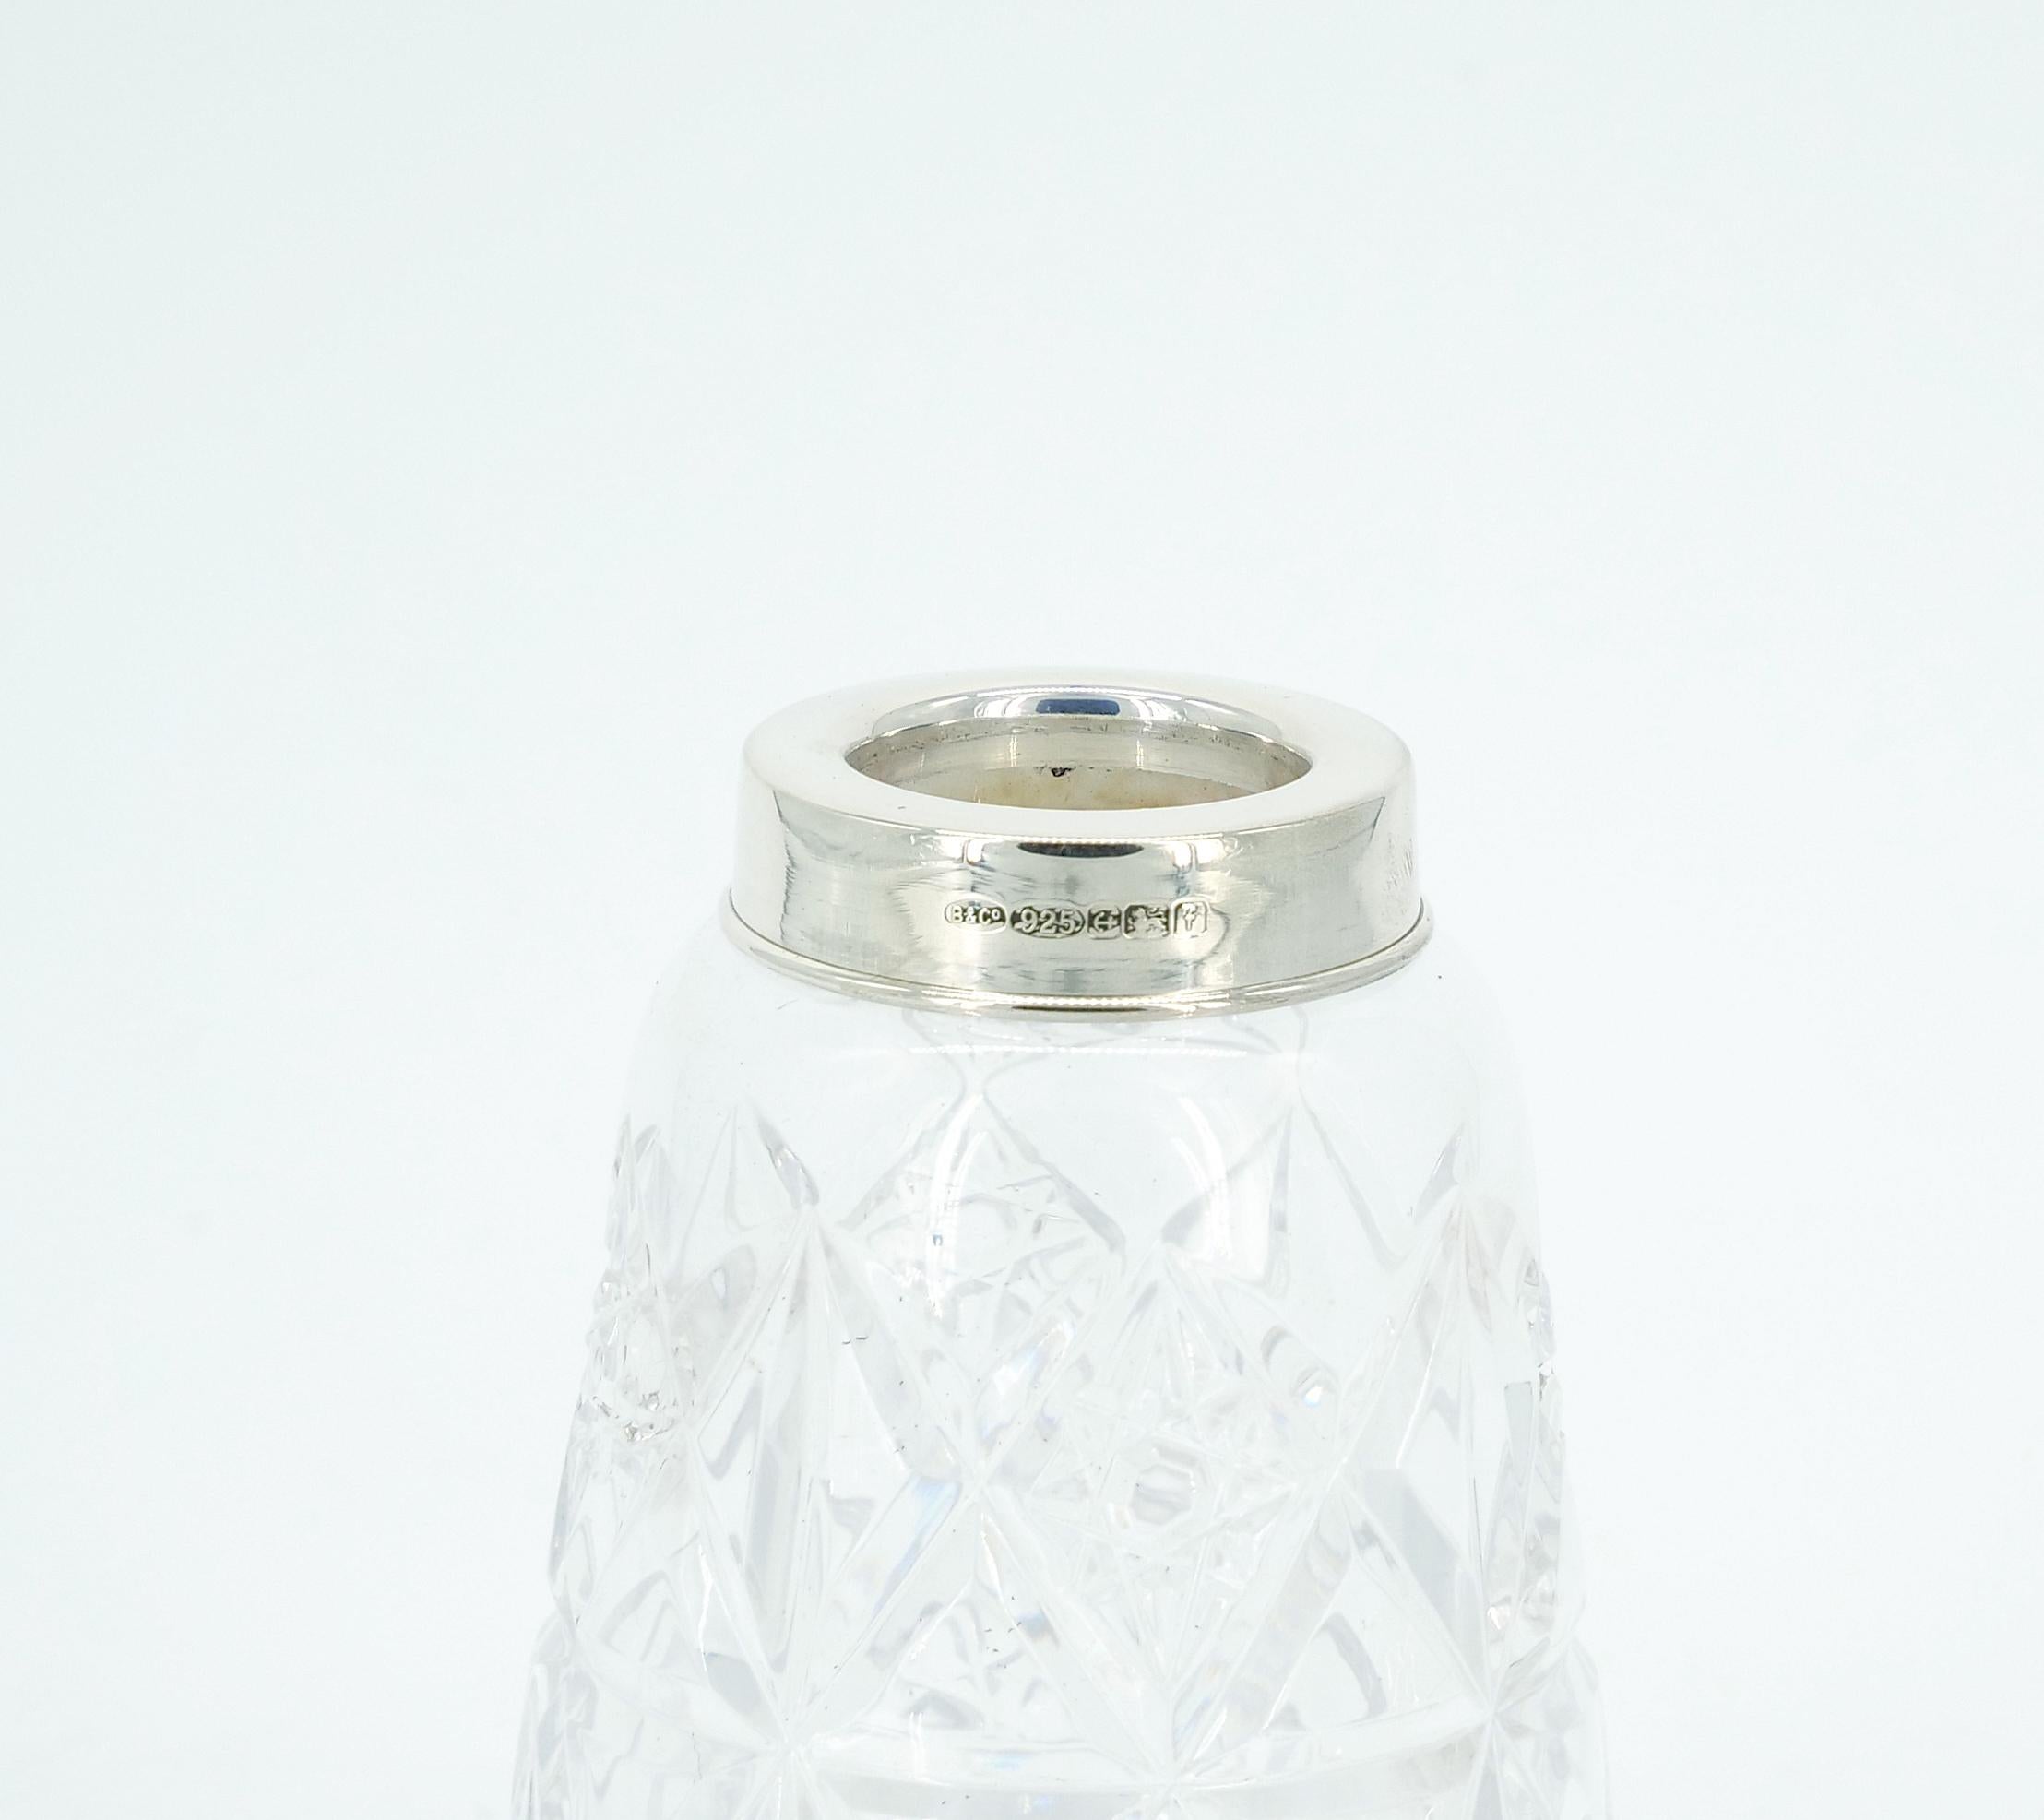 English Sterling Silver Top / Cut Glass Tableware Sugar Receptacle For Sale 4